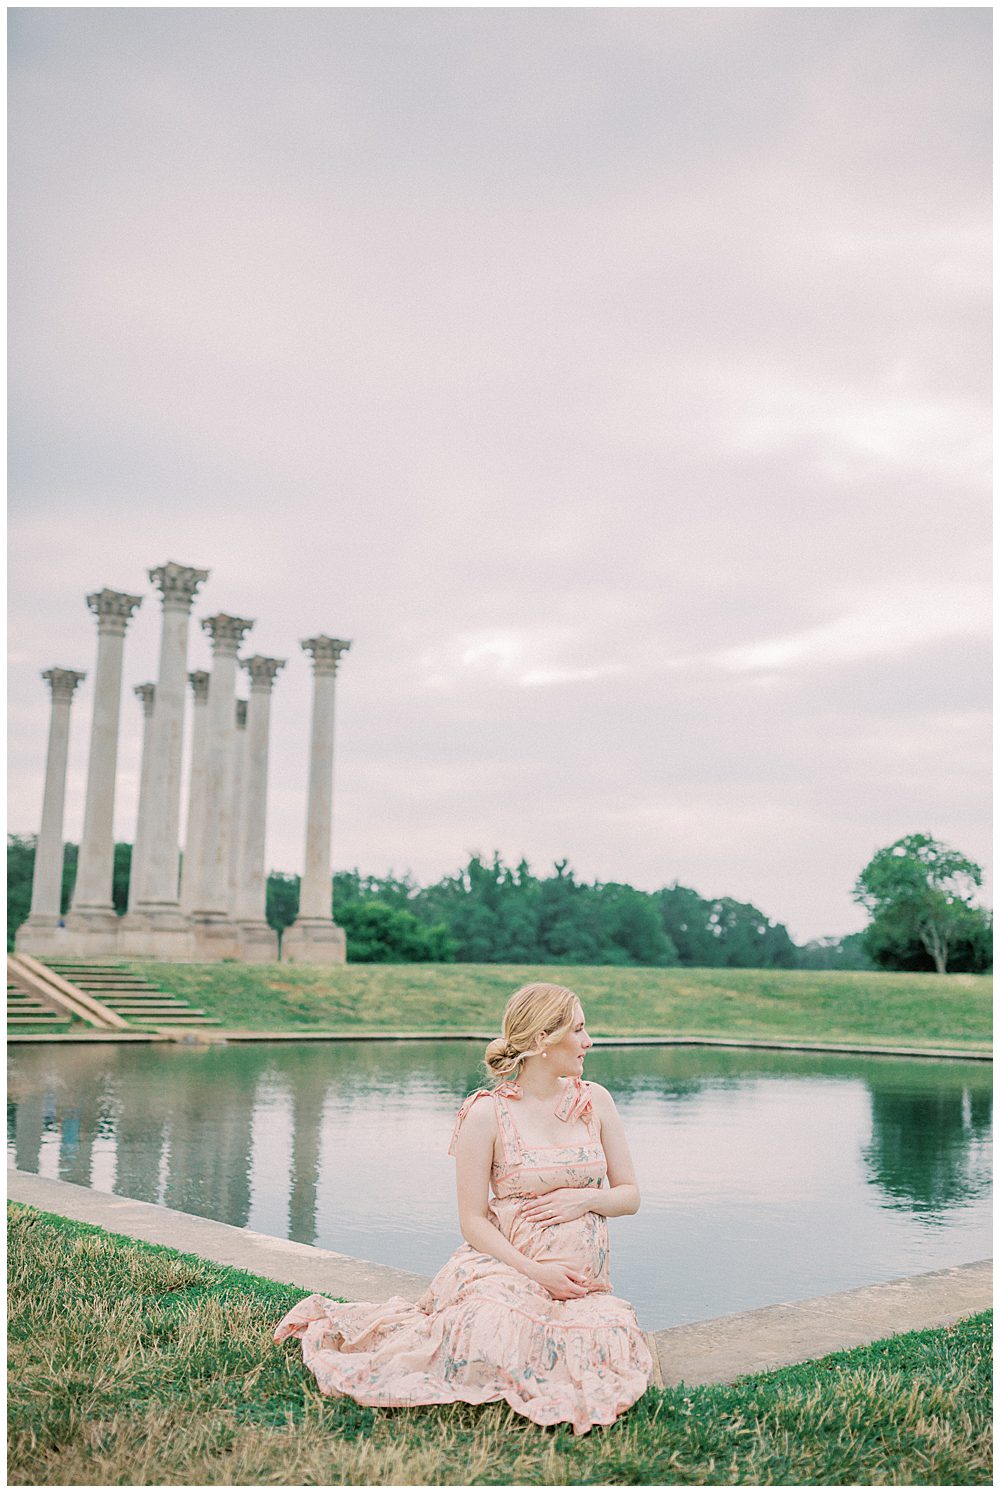 Pregnant woman sits in front of National Arboretum pond with hands on belly, looking out into the distance.